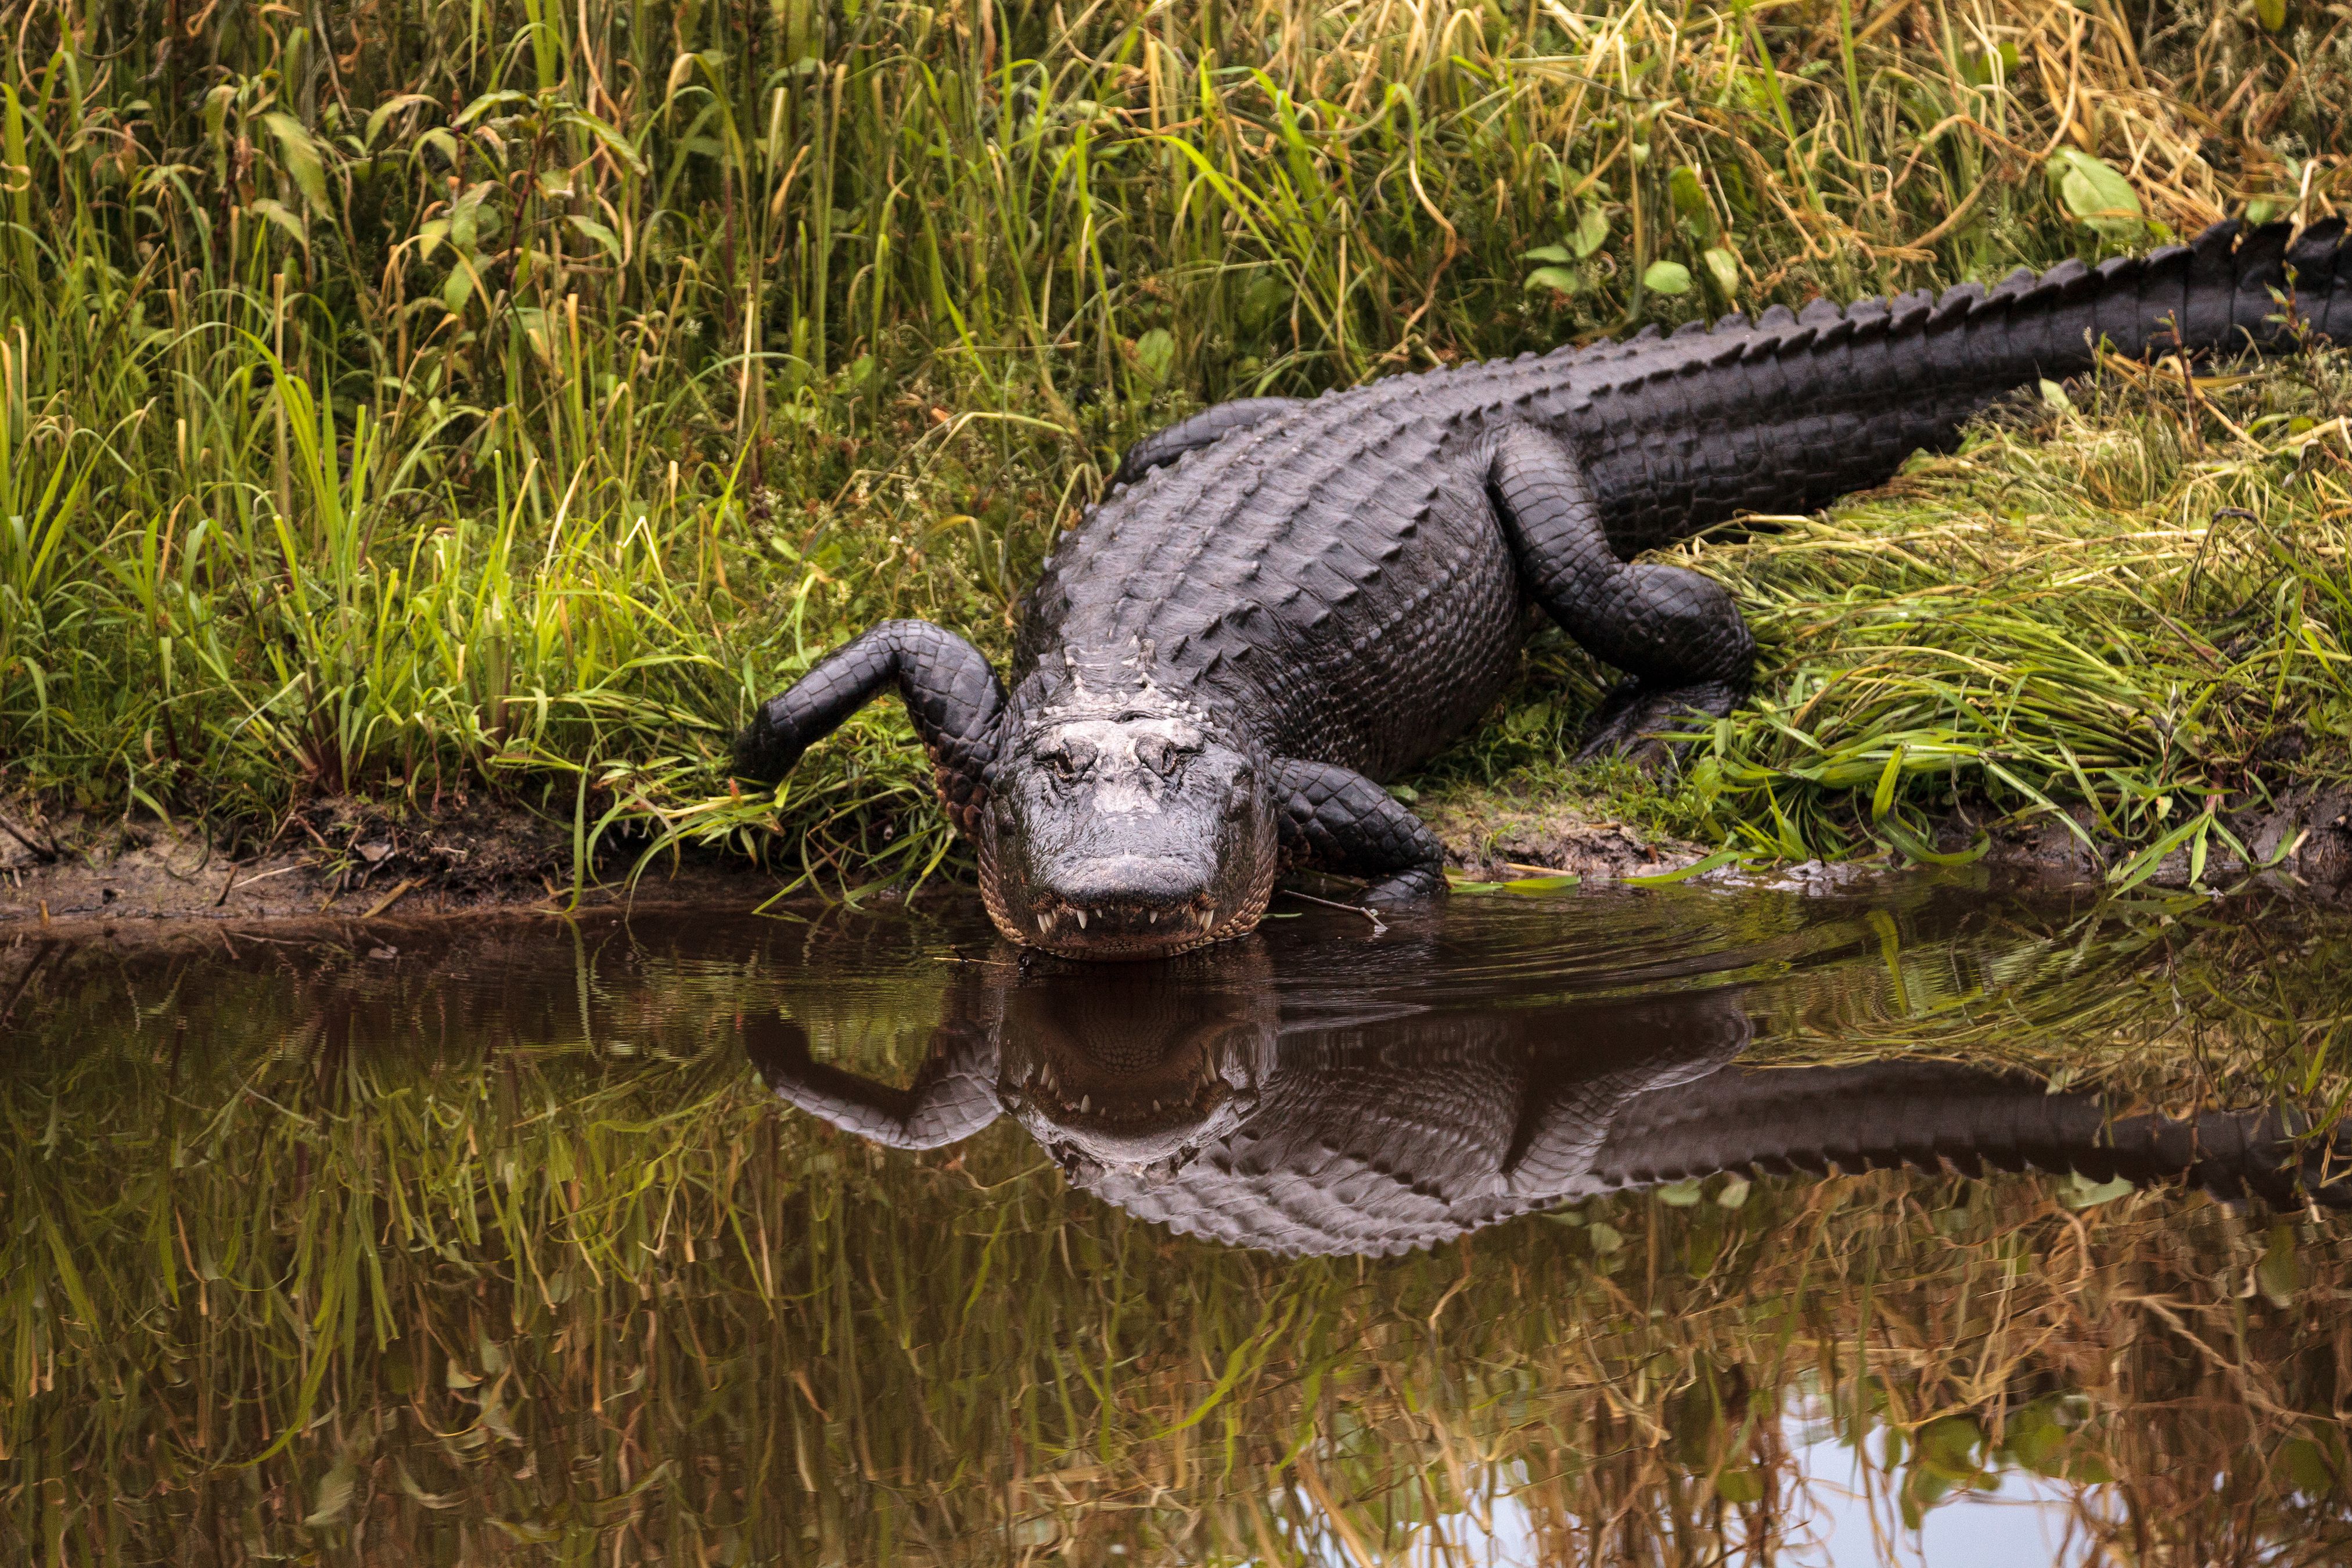 An alligator in a swamp in Florida